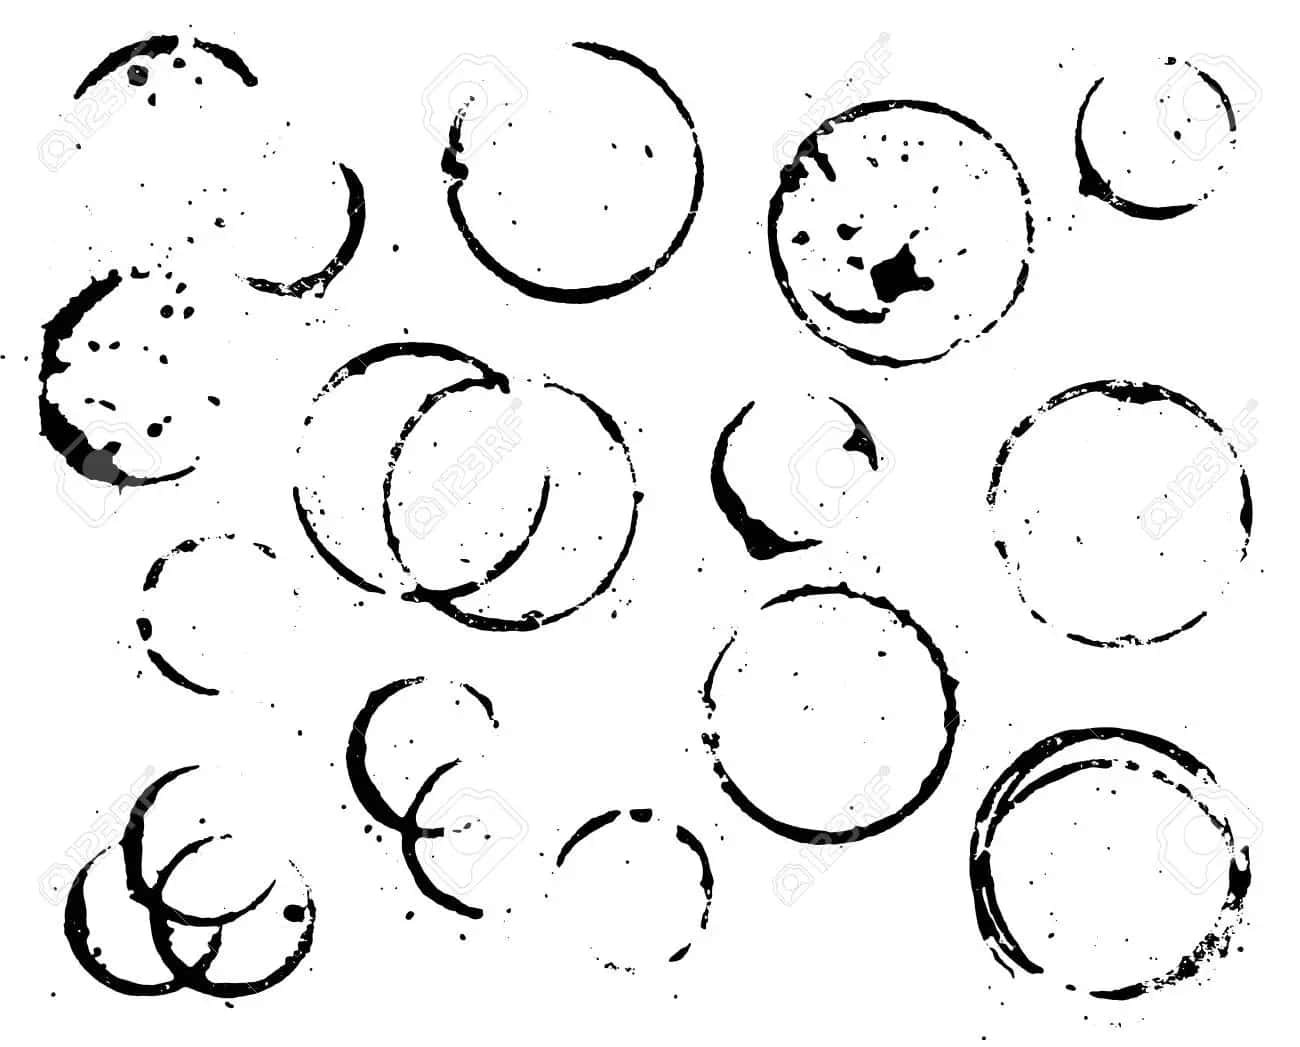 Fortuitous Circle Ink Marks Wallpaper